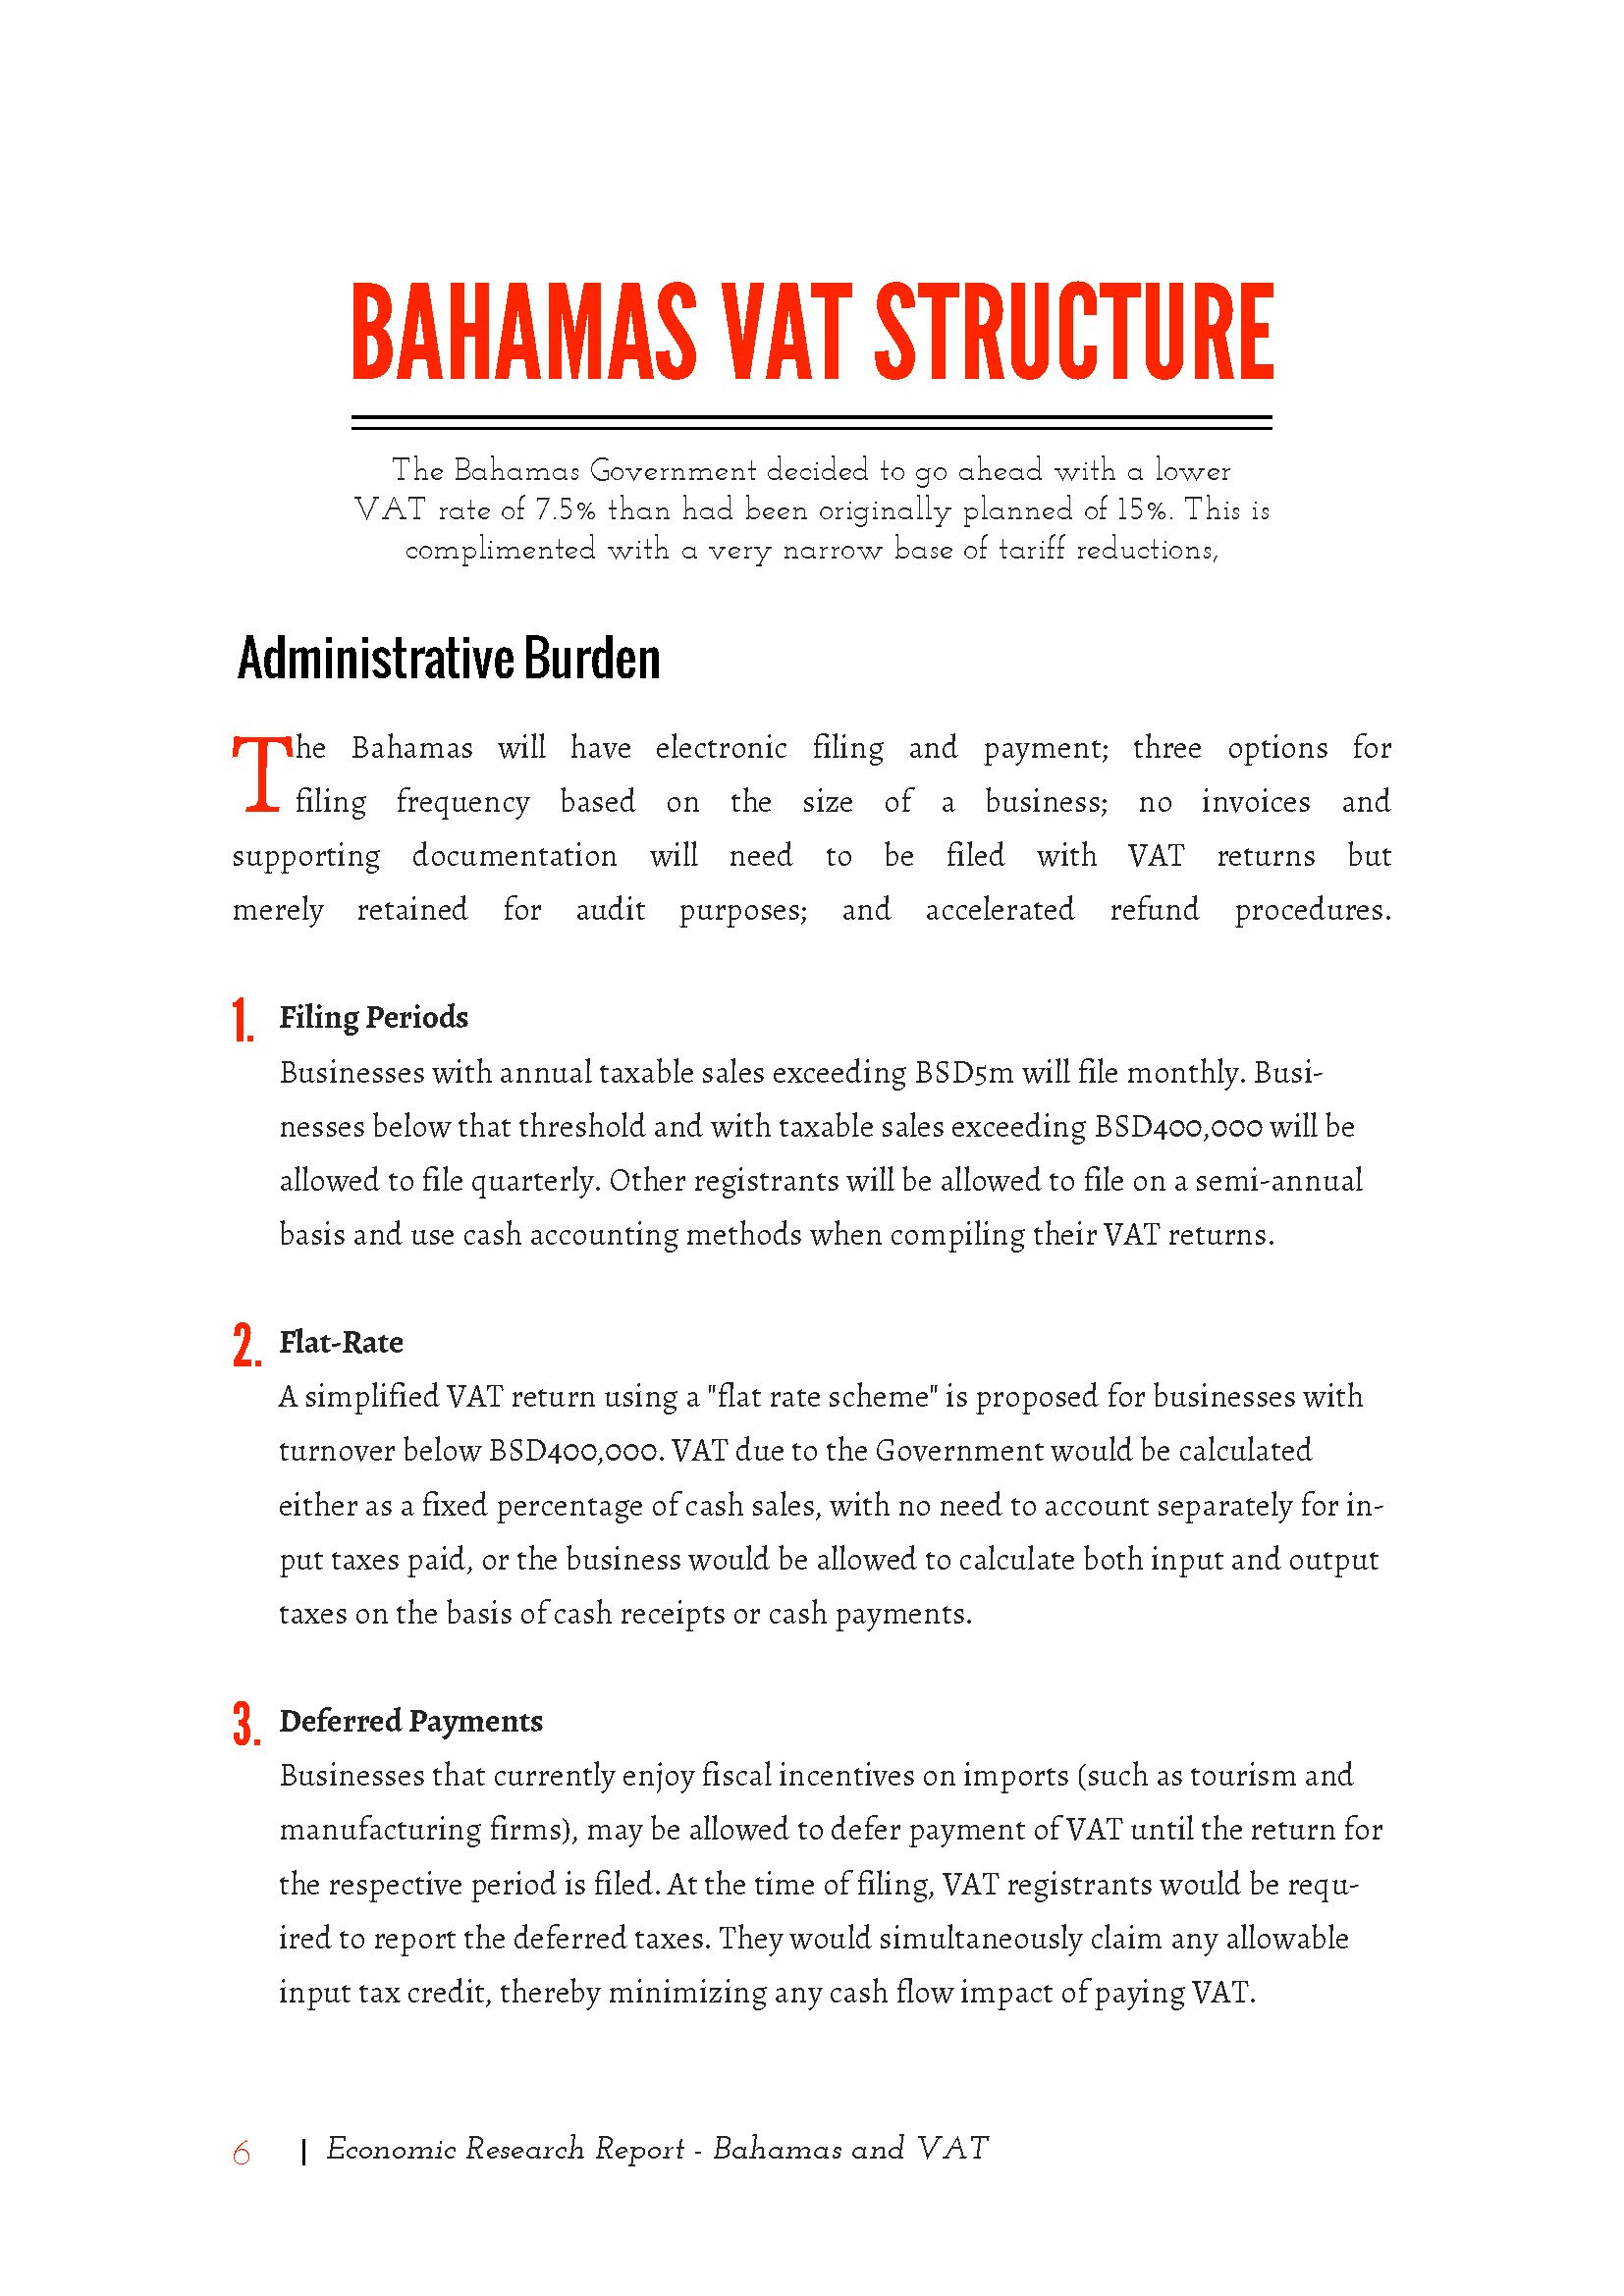 White Paper - VAT in the Bahamas_Page_06.jpg